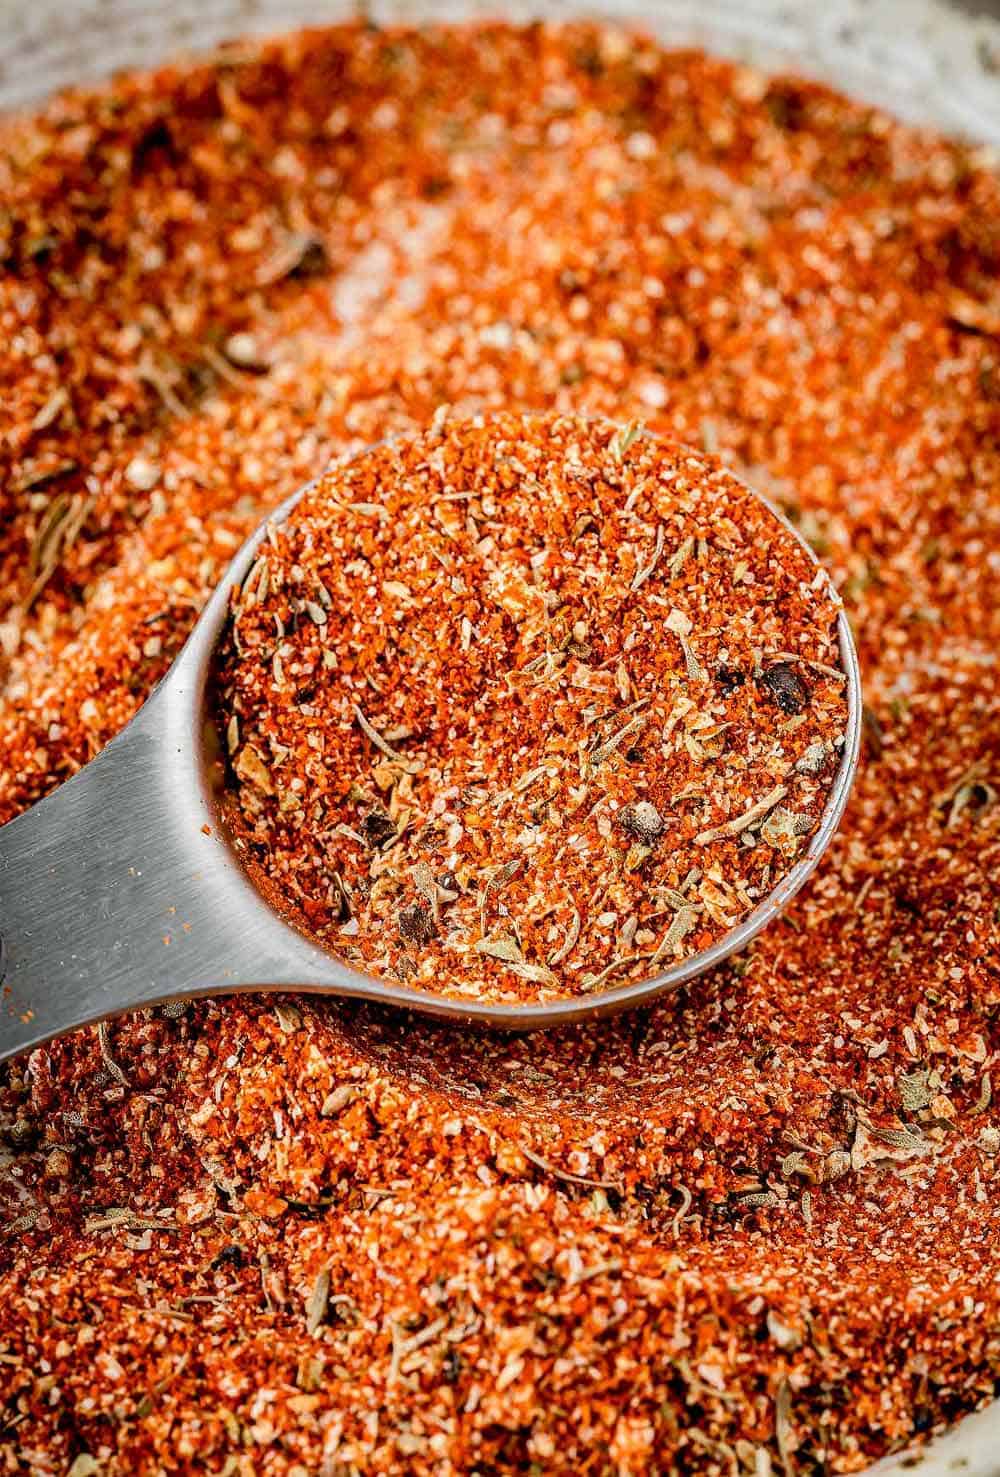 An image of homemade blackening seasoning on a white plate with a measuring spoon next to it. The seasoning is a dark reddish-brown color and is a mixture of various spices, including paprika, cayenne pepper, garlic powder, onion powder, thyme, and oregano. The spoon is filled with the seasoning.